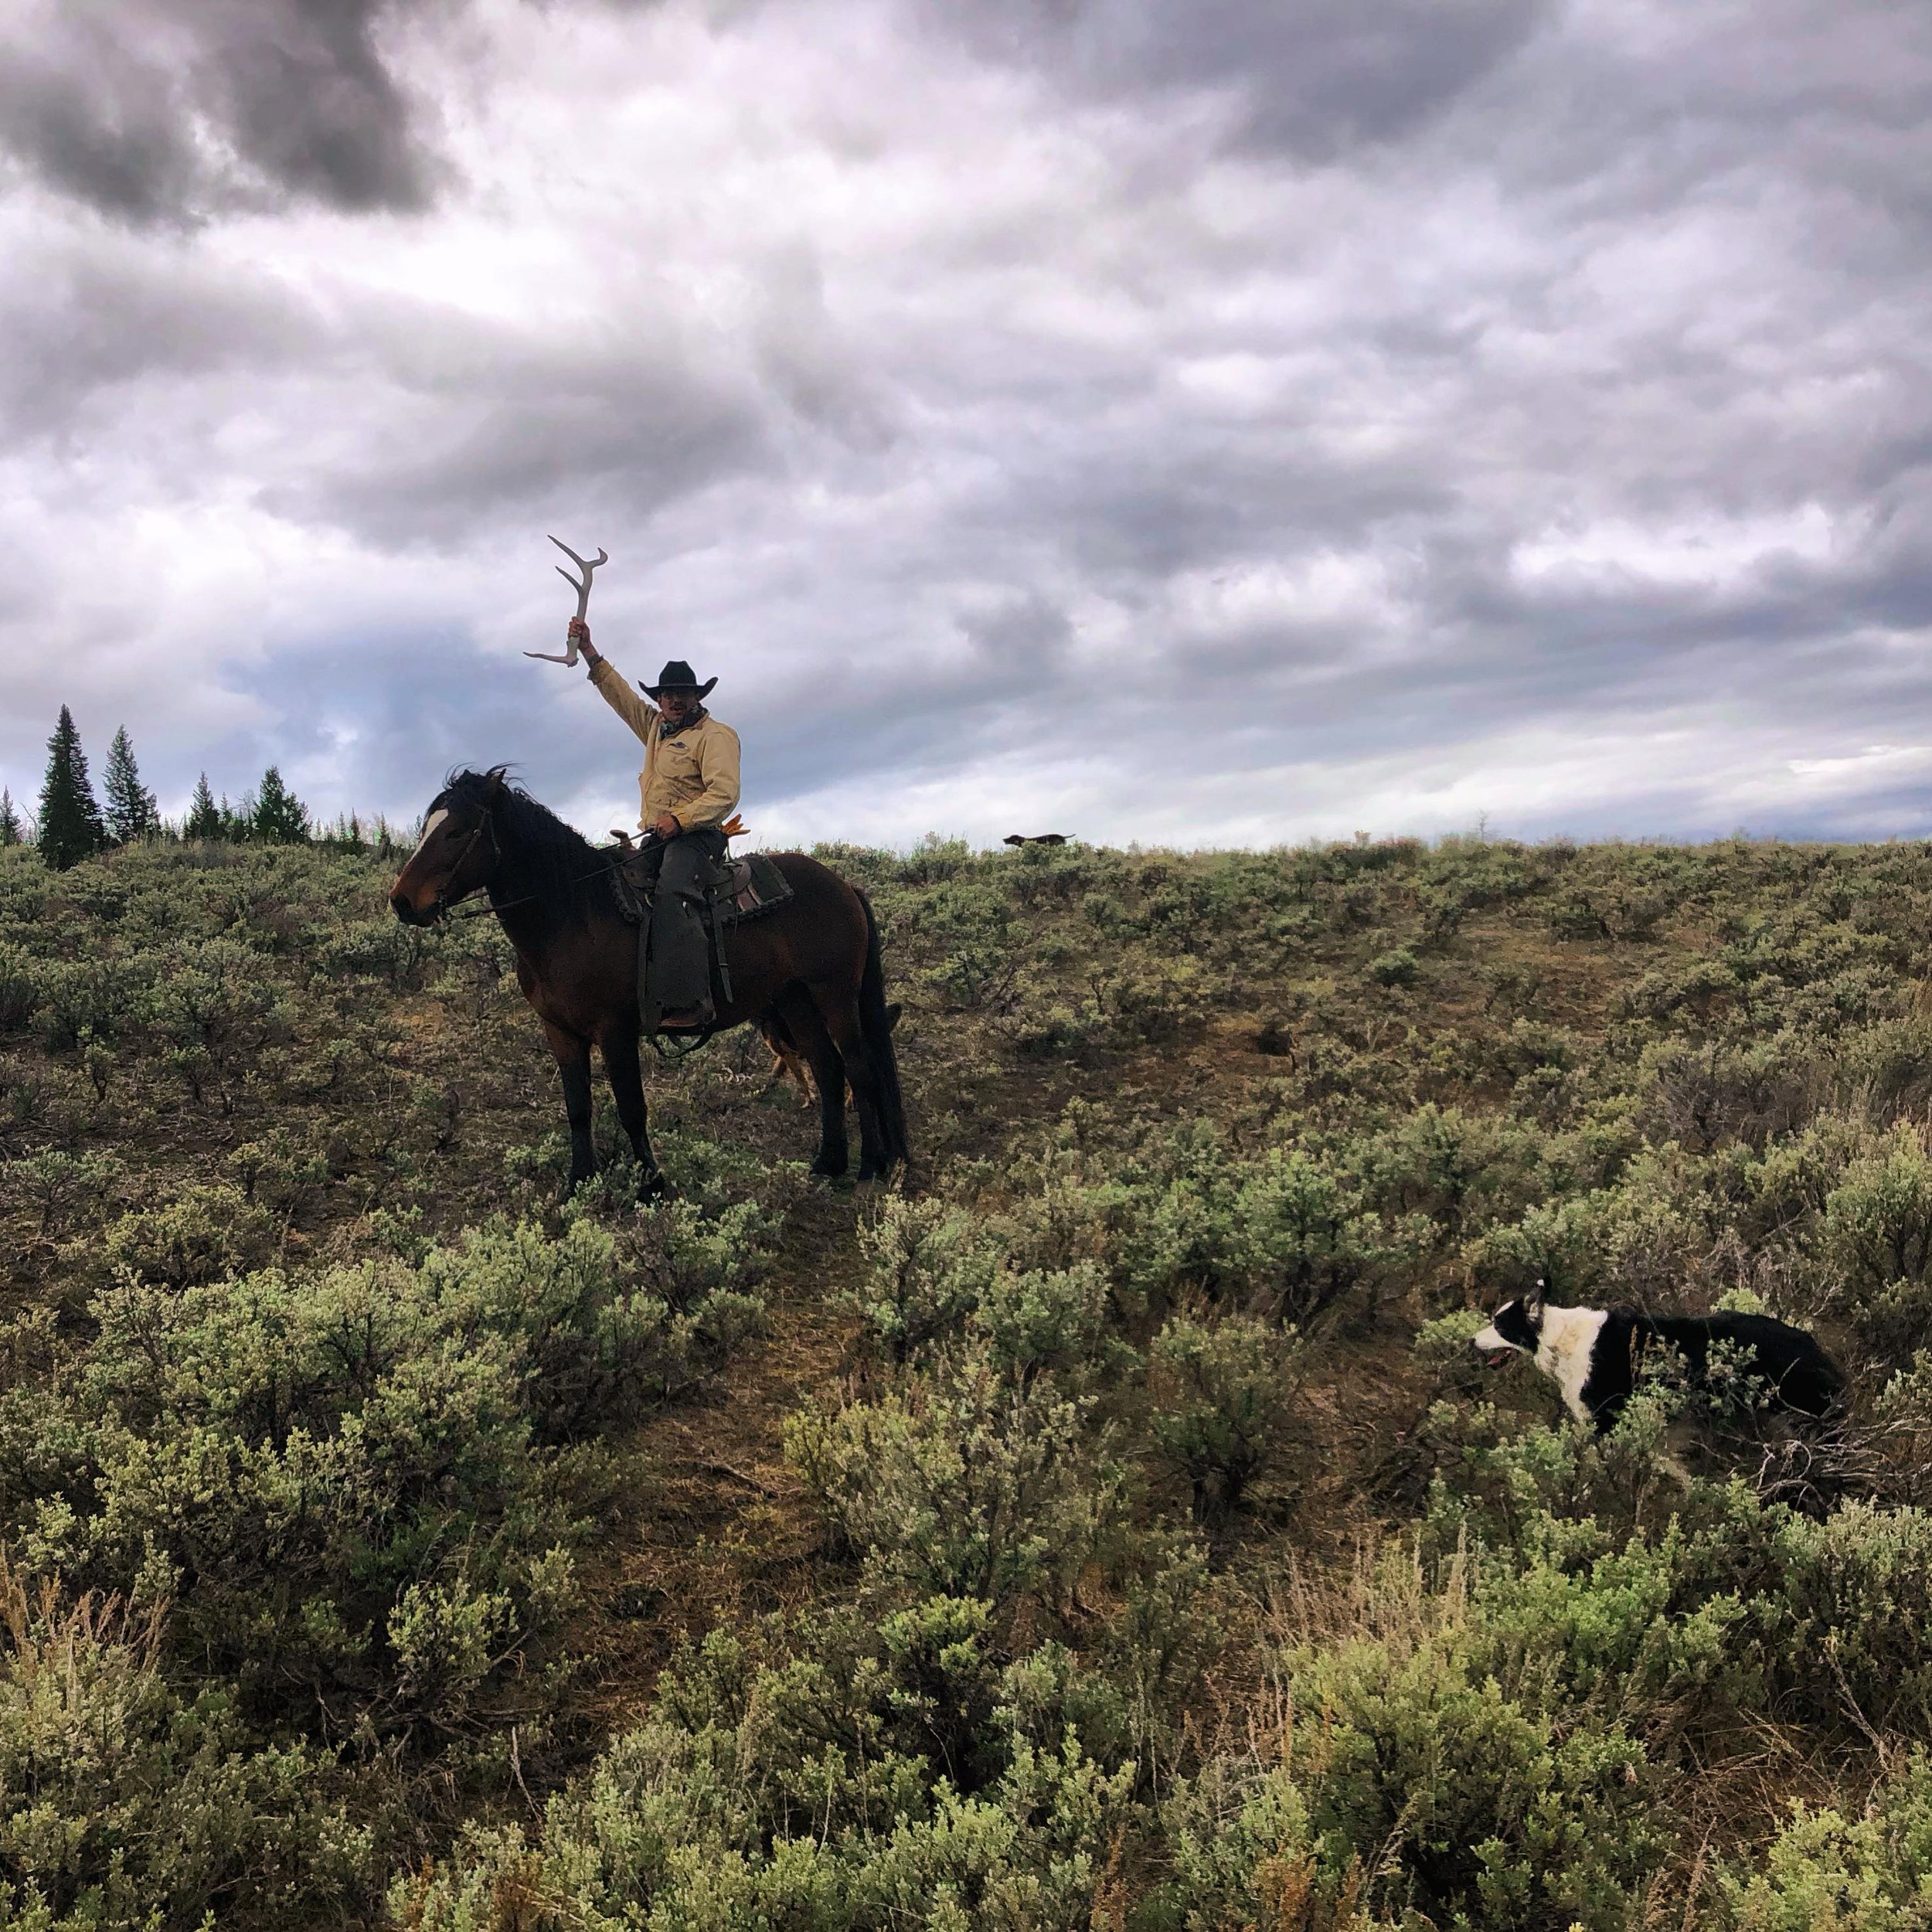 Spring Trail rides start the second week of May and are filling up quick. Book your seat in a saddle while they last!

www.jhoutfittingcompany.com

#trailride #horse #vacation #bucketlist #hornhunter #hornhunting #wyoming #antlers #grandtetonnational